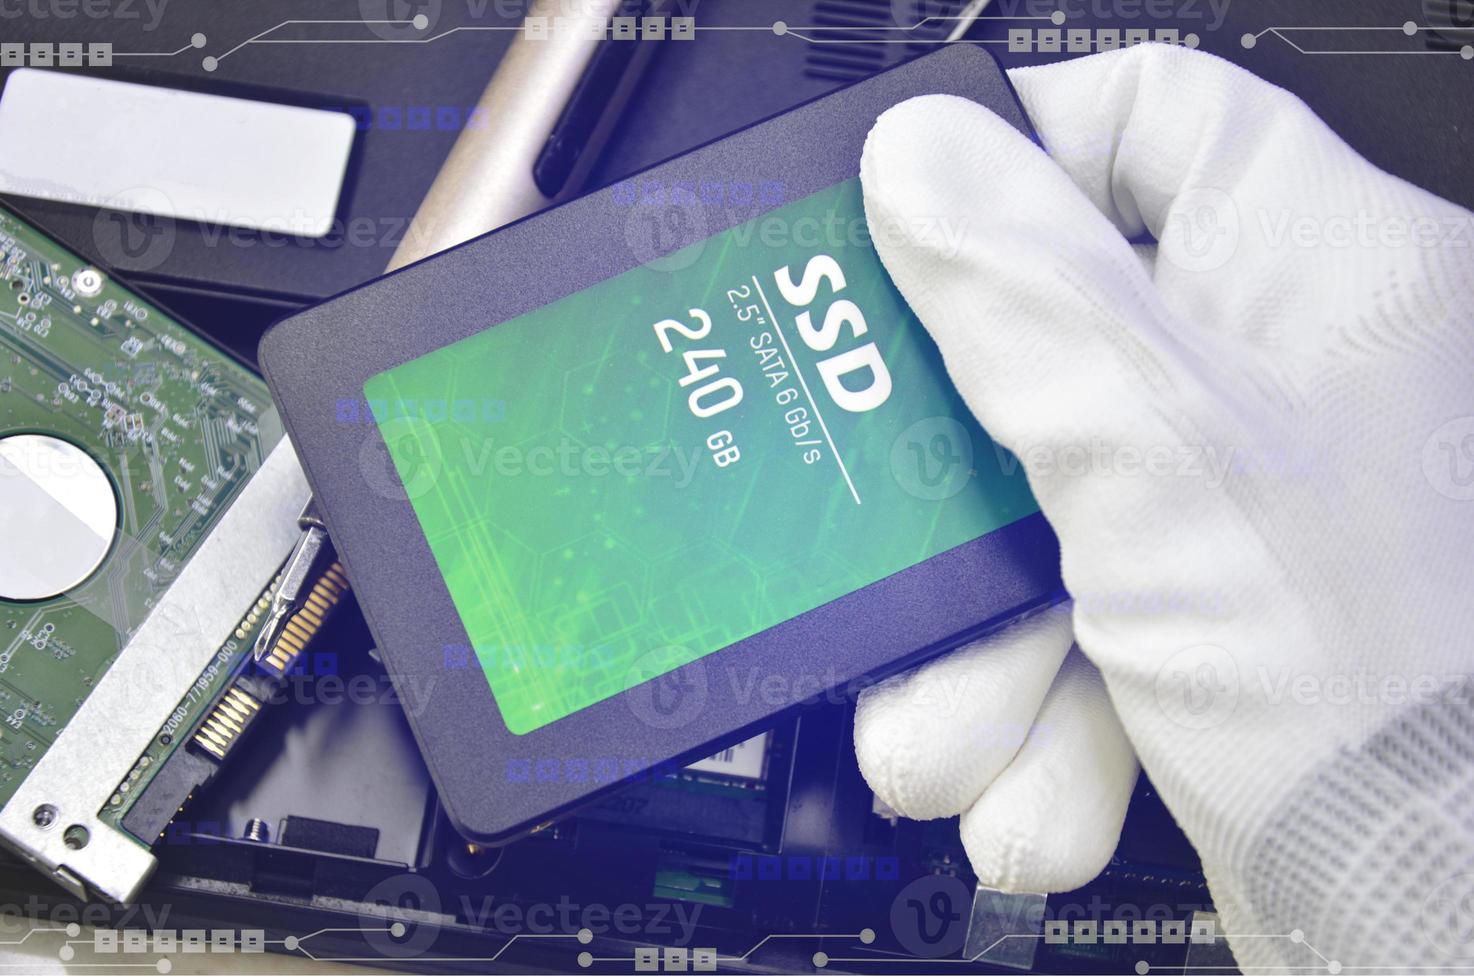 2.5-inch SSD hard disk drives are used to store data, also known as hard disk drives. It is currently being used at a very high rate. photo